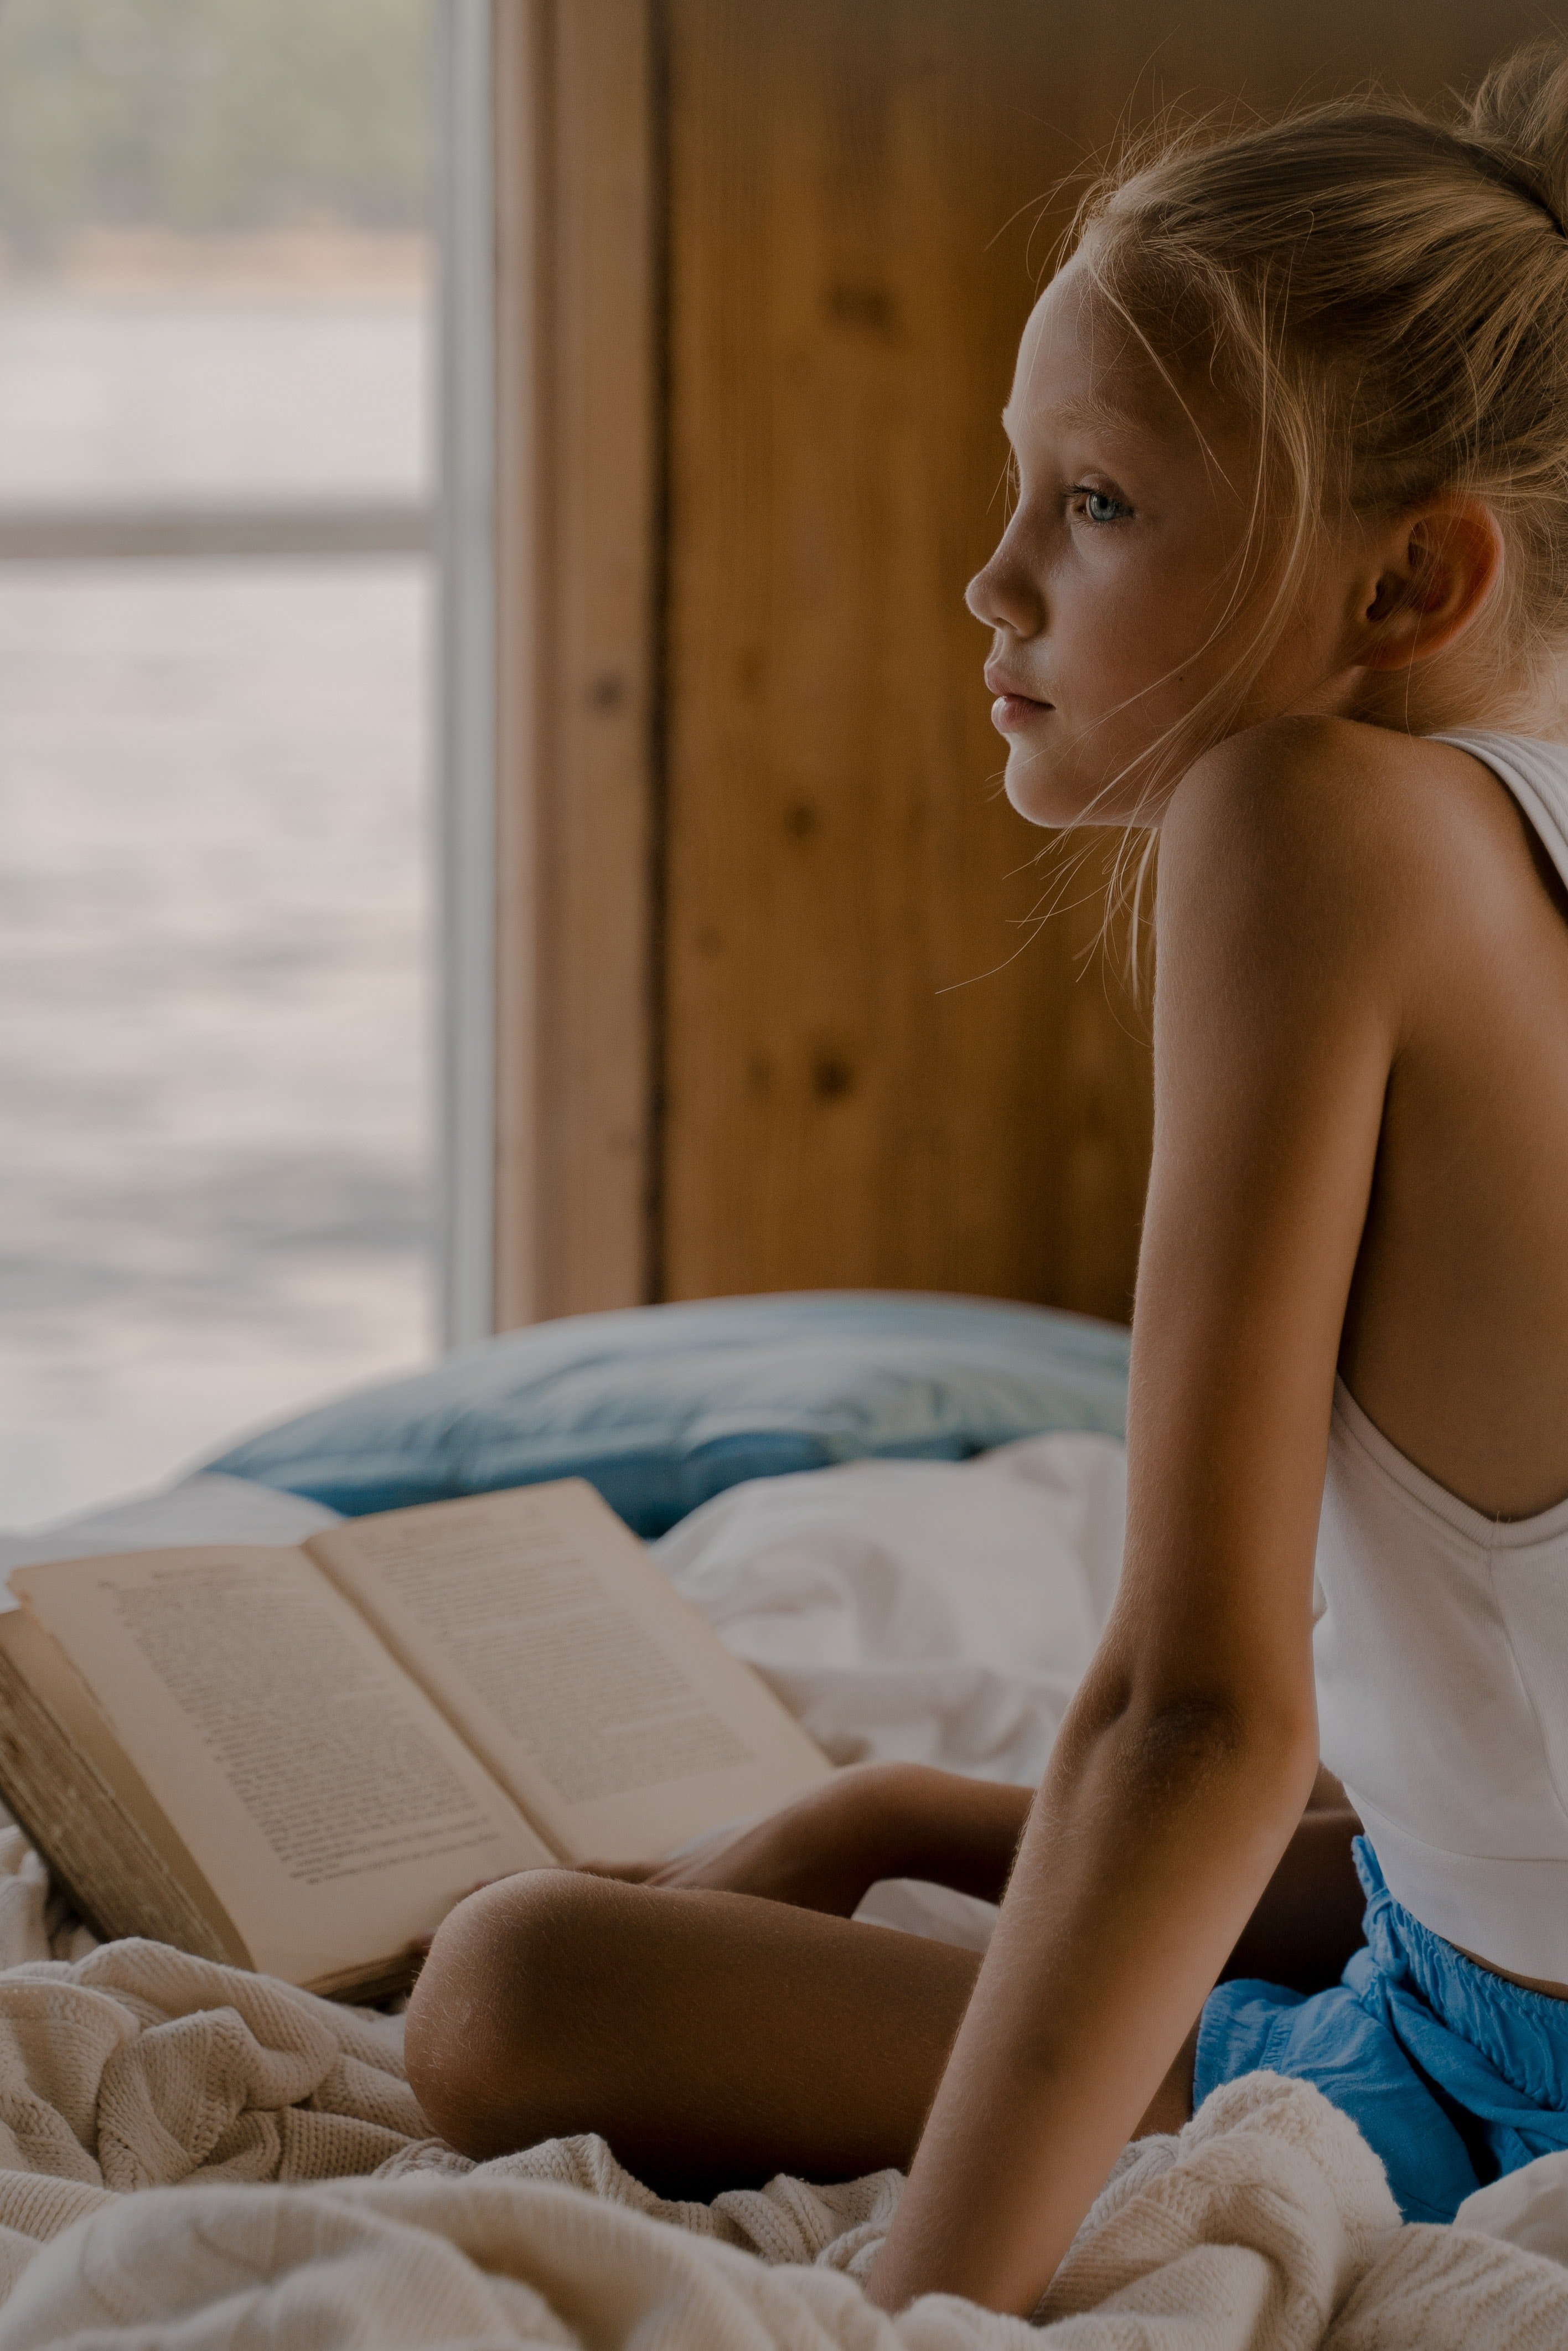 Alice was sad that her vacation was over. | Source: Pexels